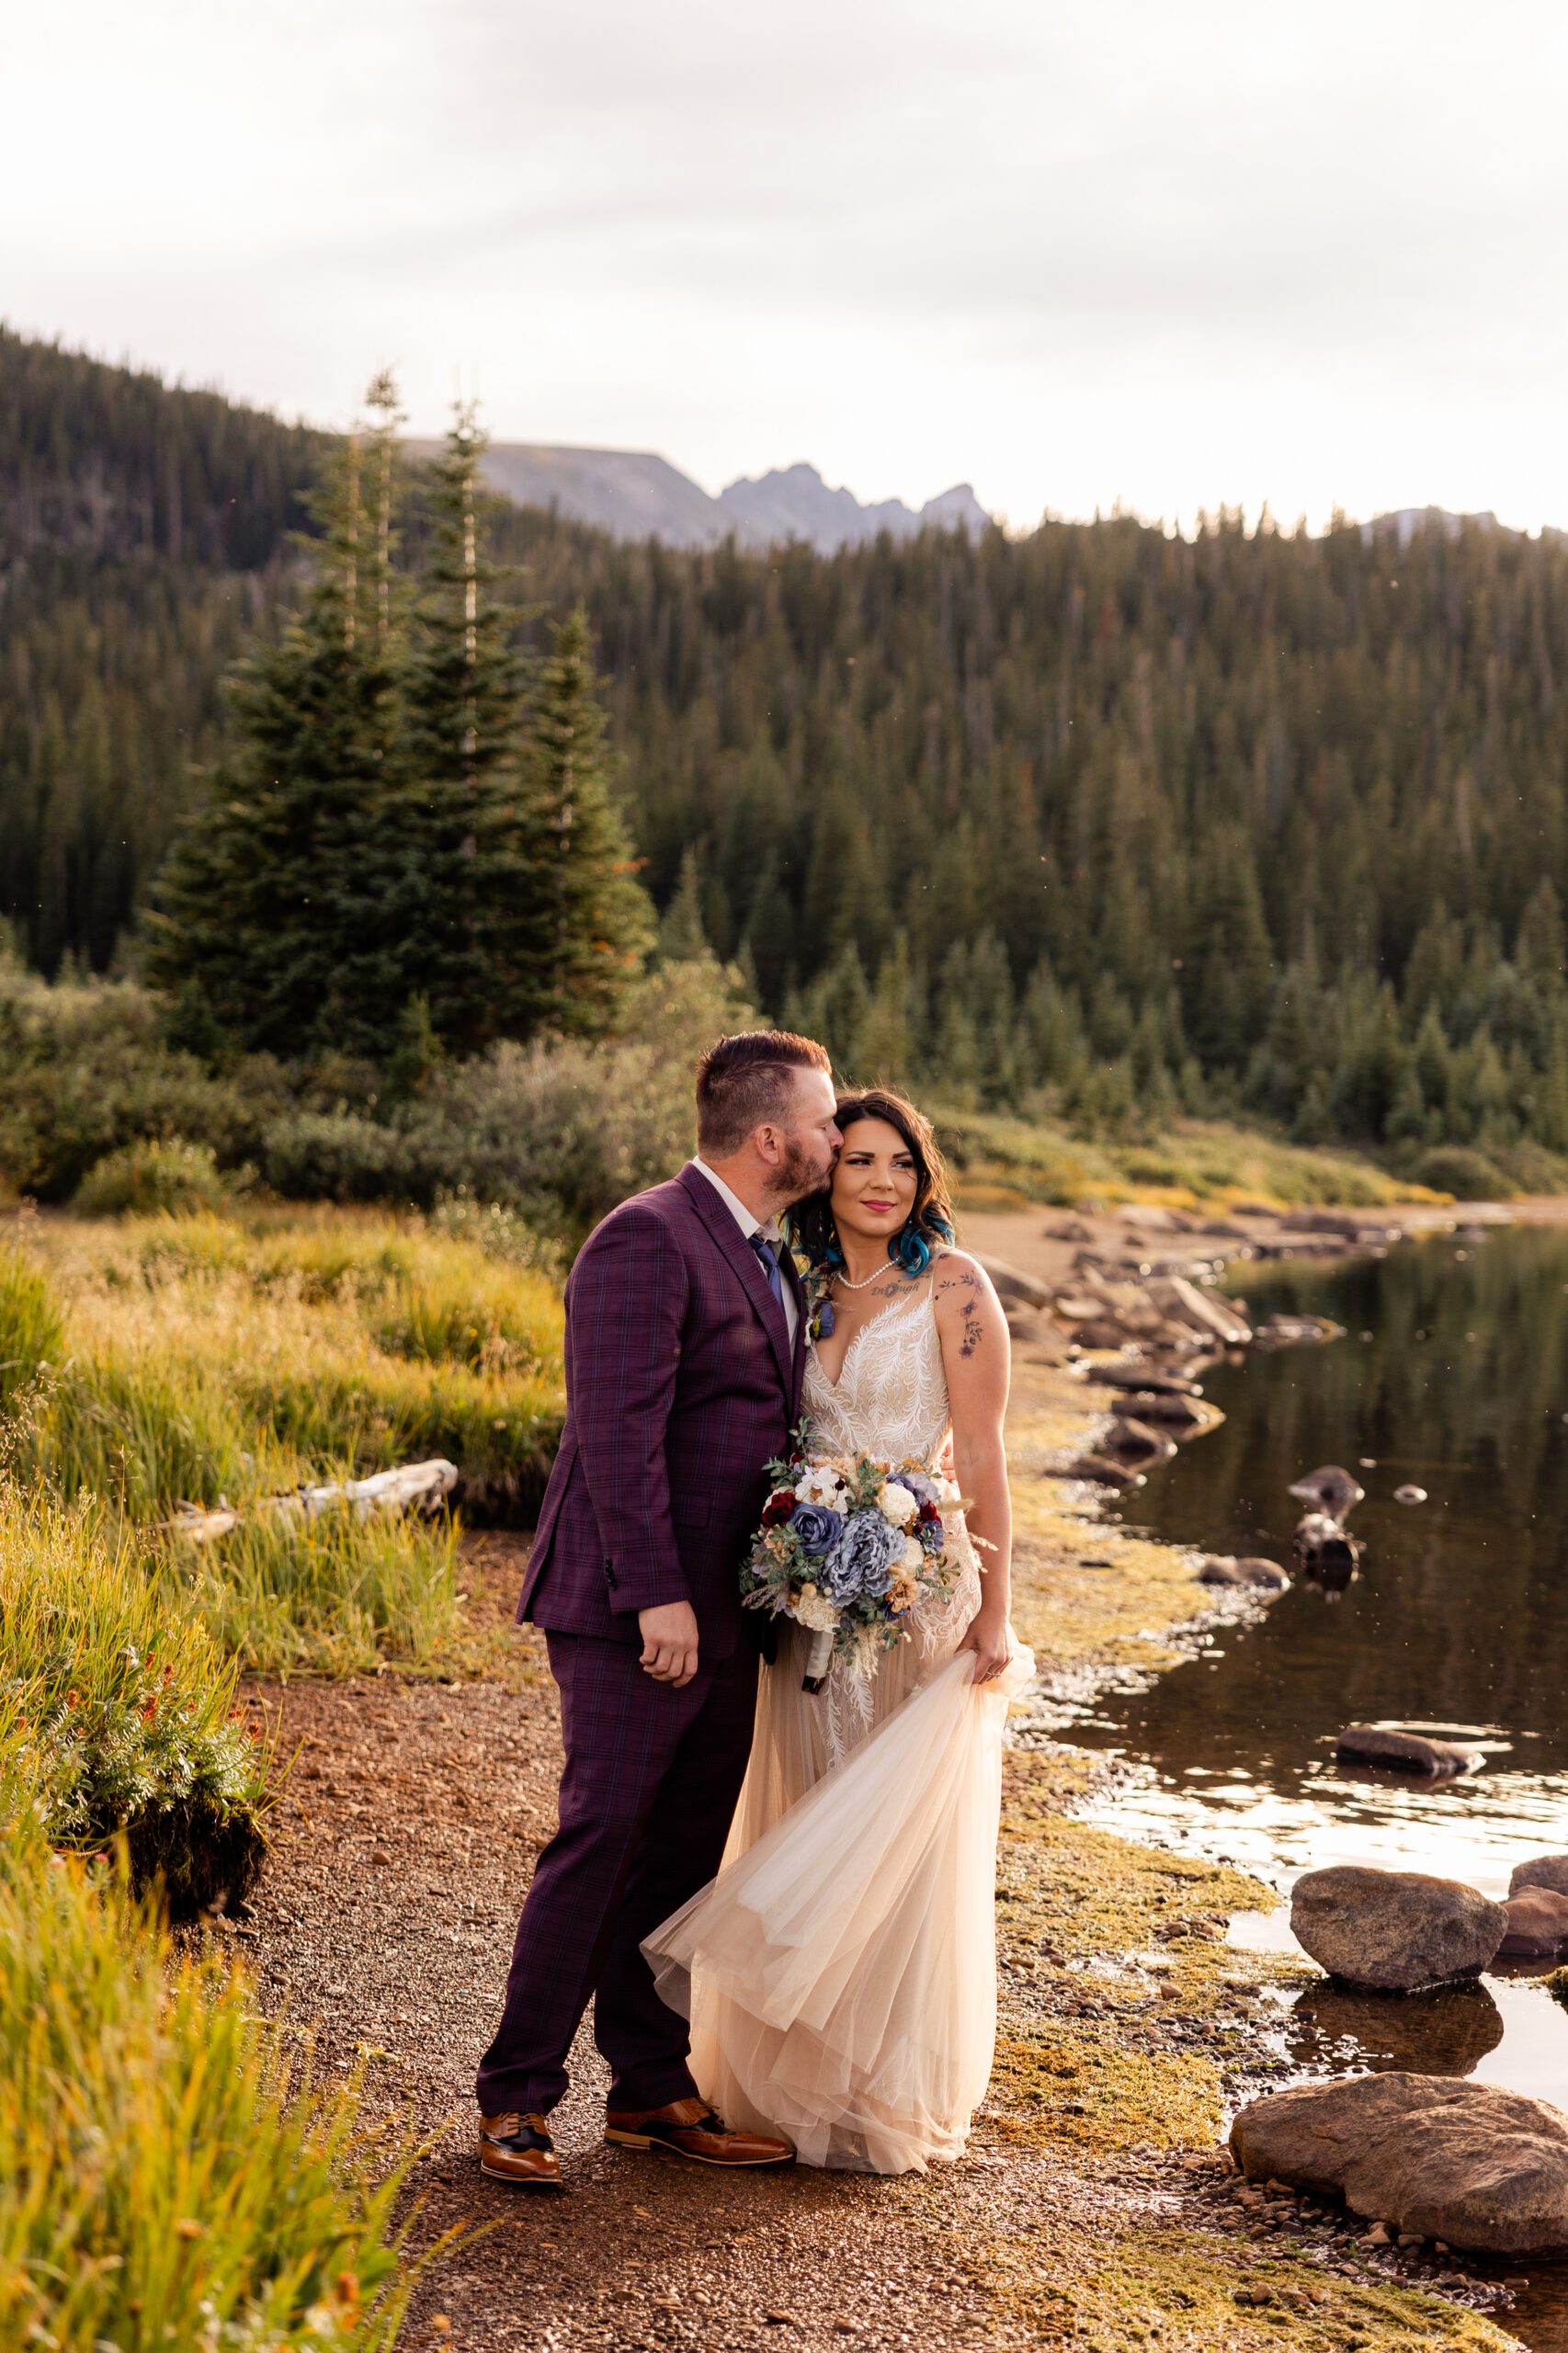 Groom kissing his bride on on the cheek at their Brainard Lake Elopement.